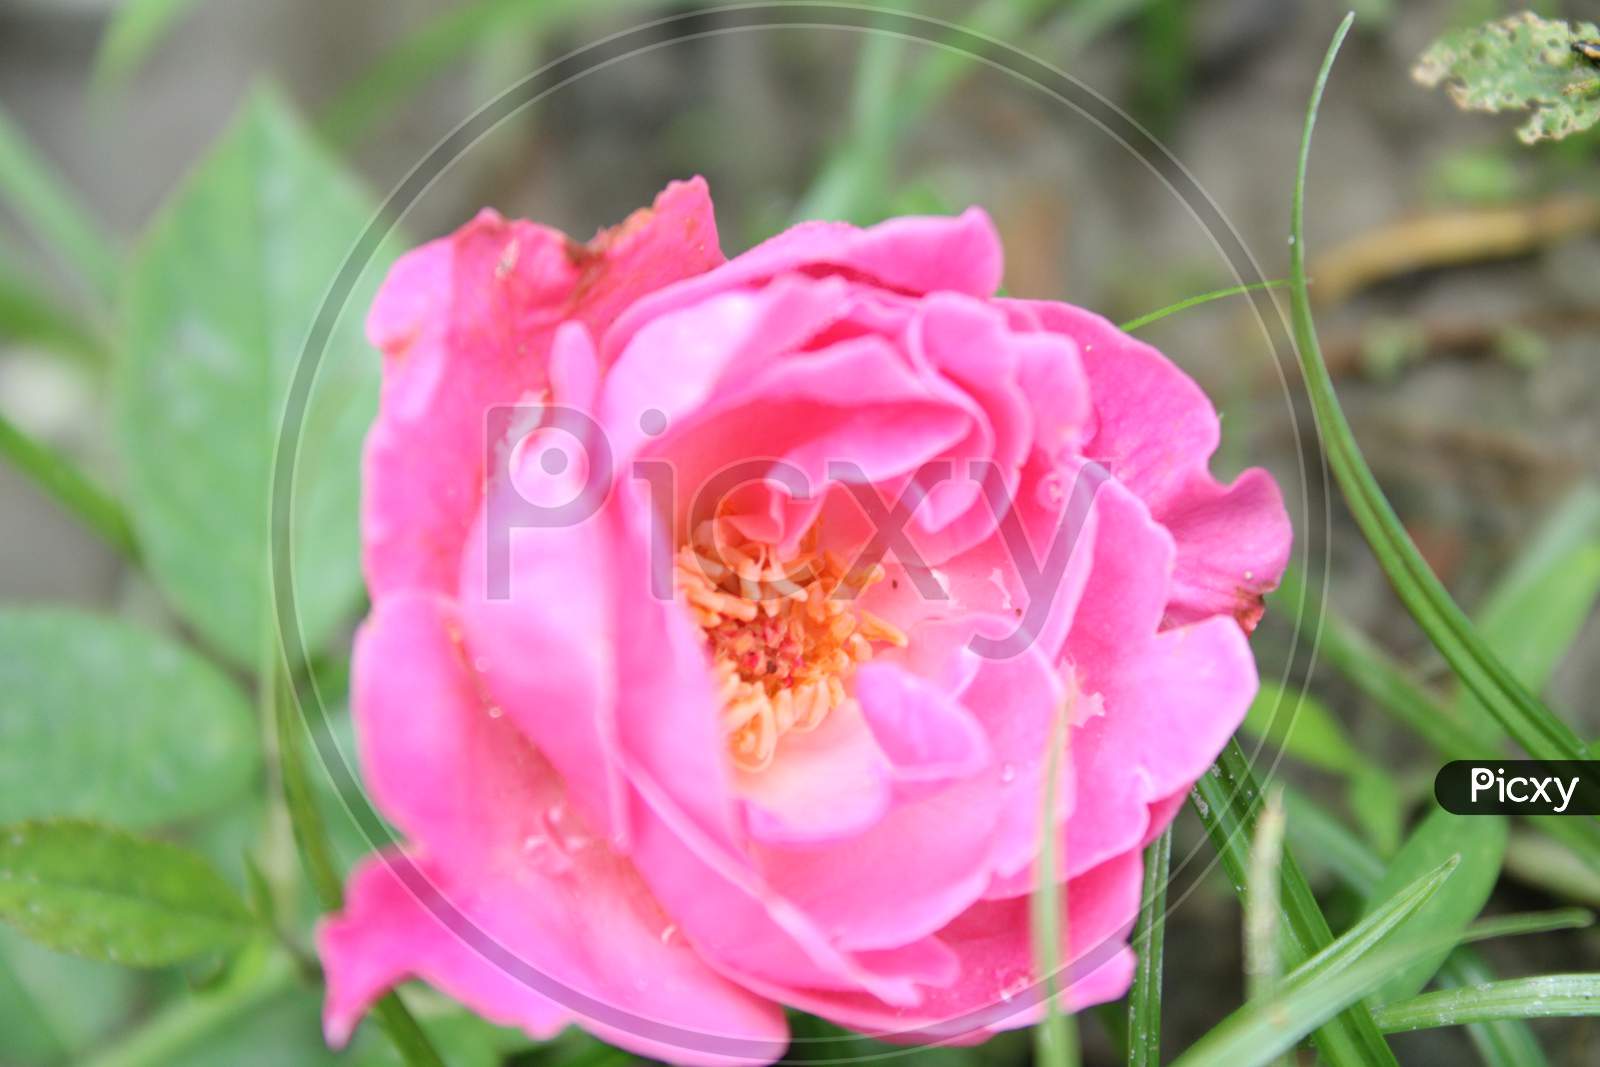 Pink rose flower on the grass in the garden